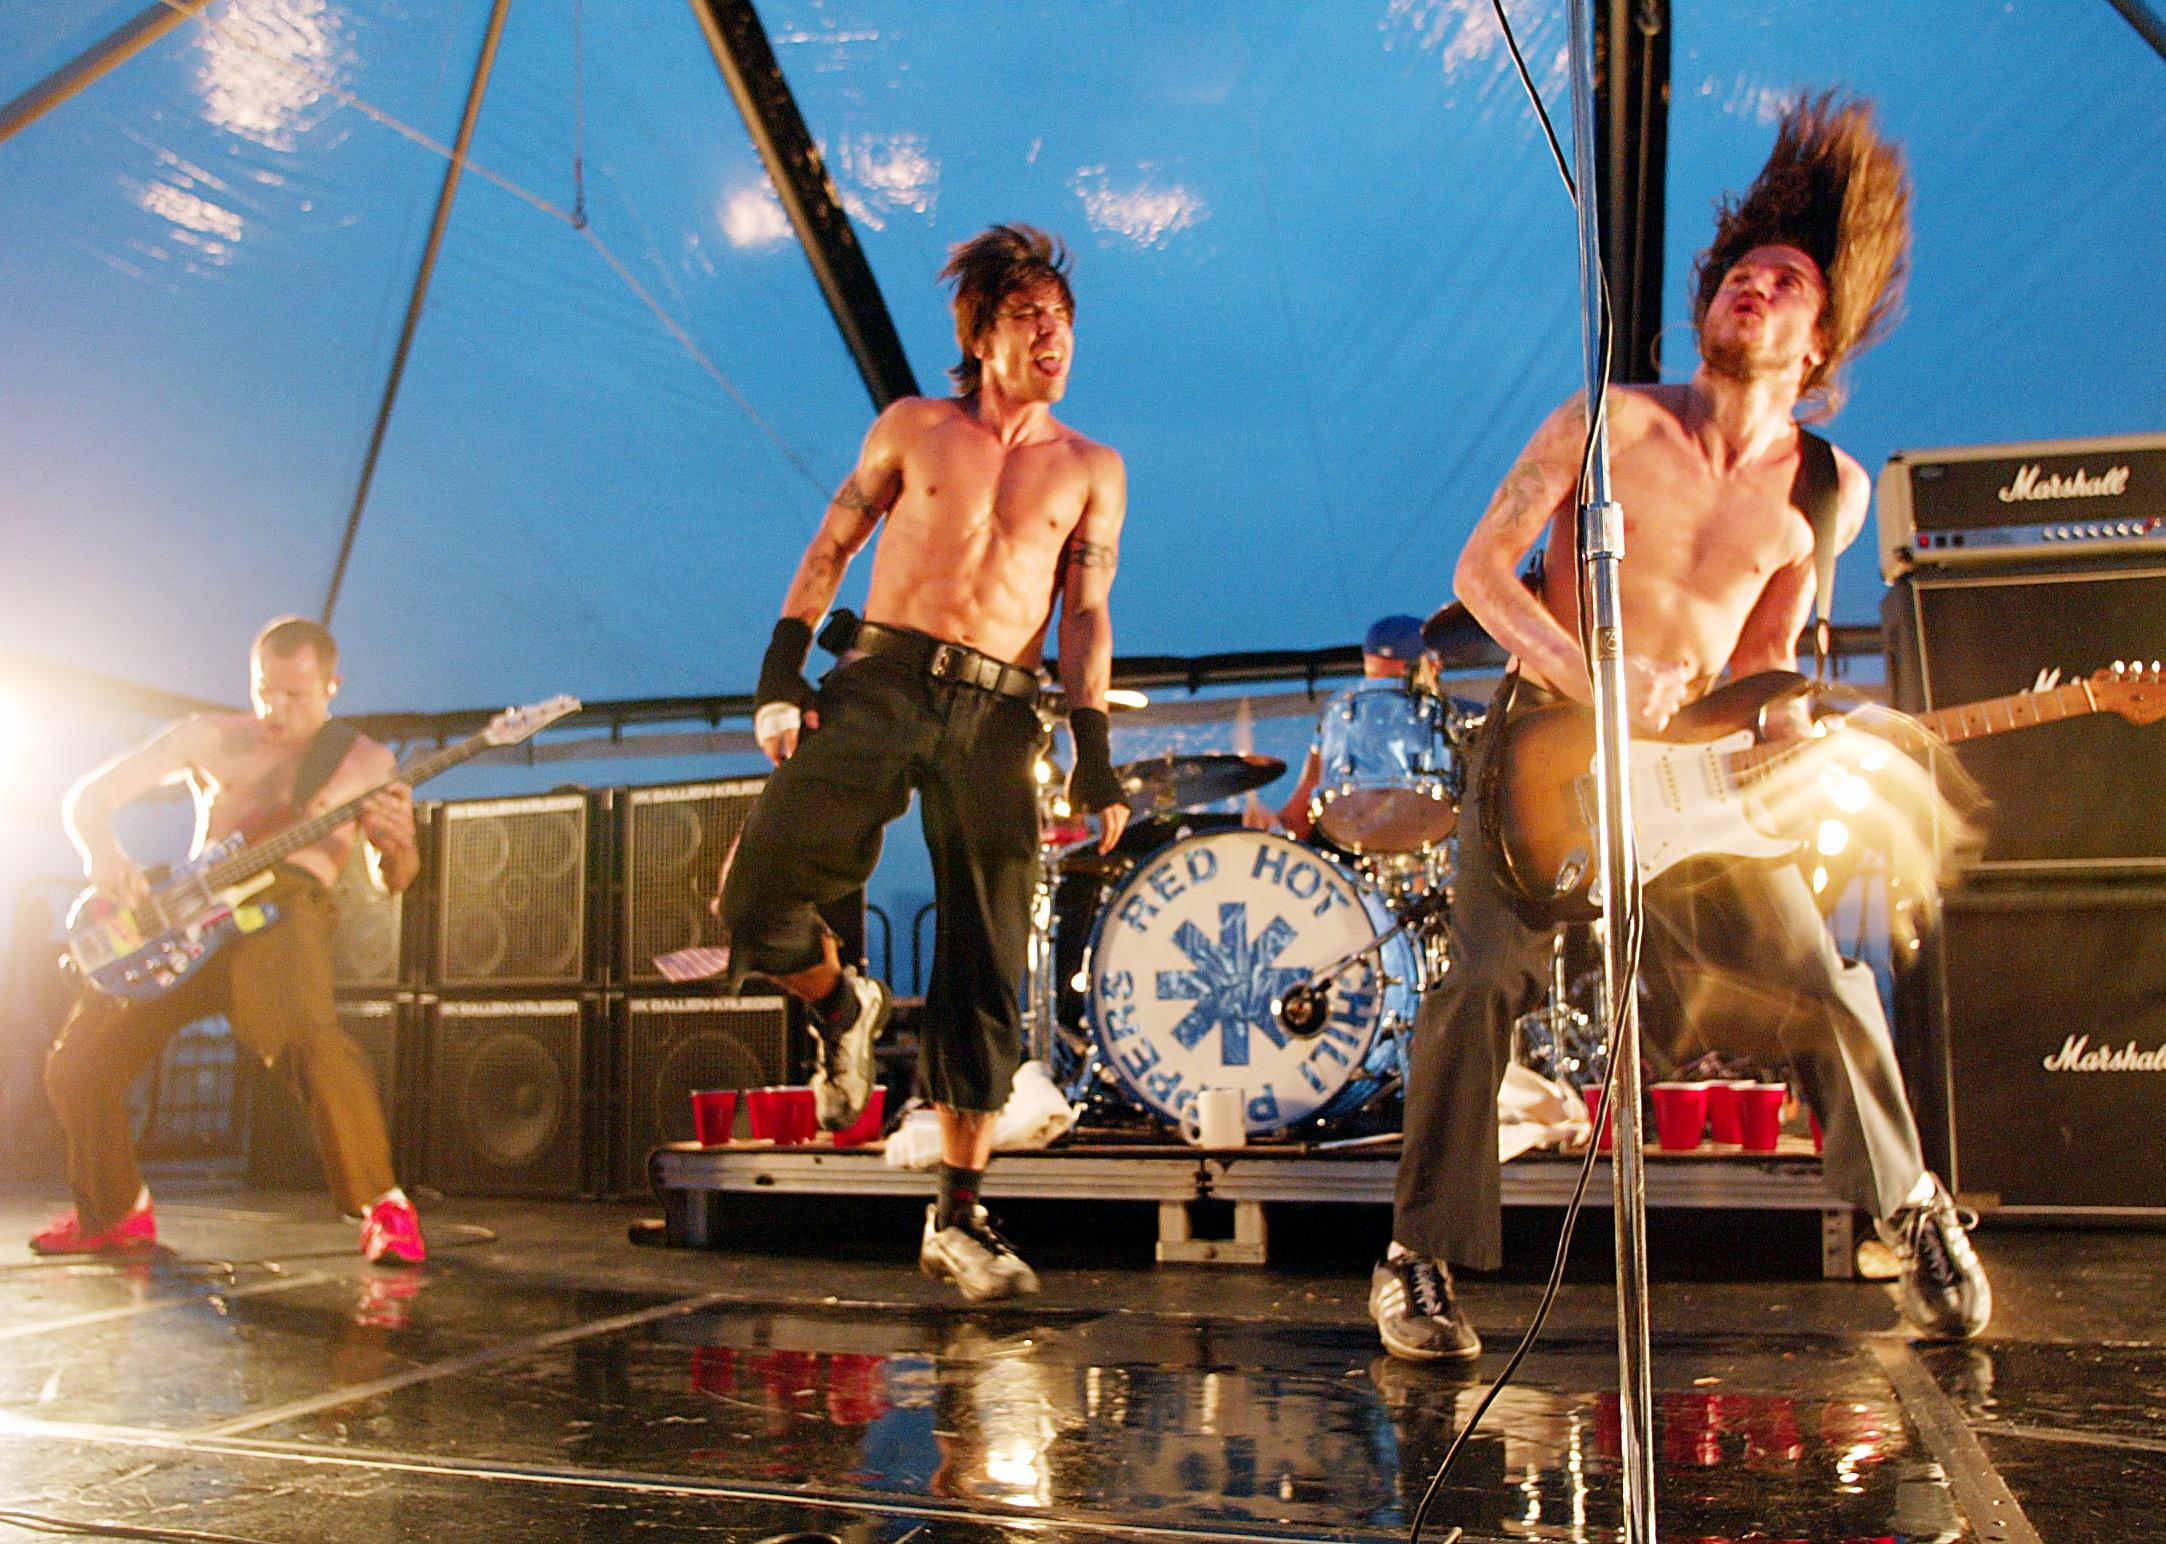 The Red Hot Chili Peppers perform on Ellis Island in New York City.